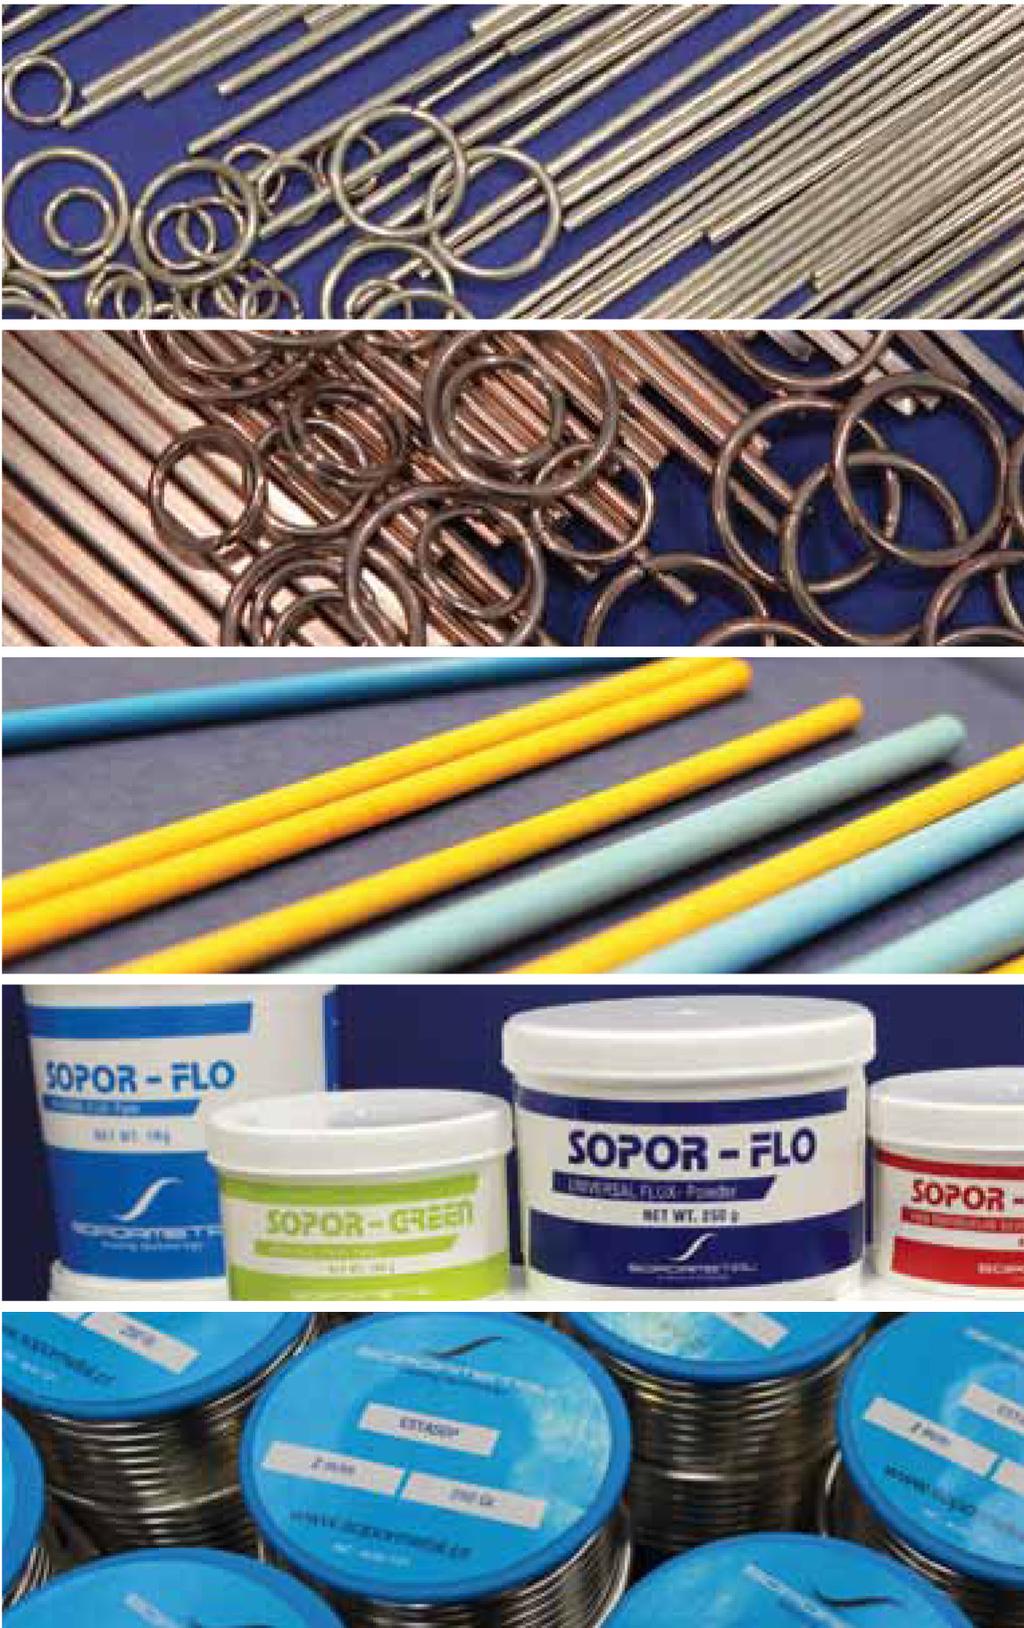 SILVER BRAZING ALLOYS Cadmium-free silver brazing alloys and tri-metal alloys for the entire industry, as well as several special alloys in the form of rods,